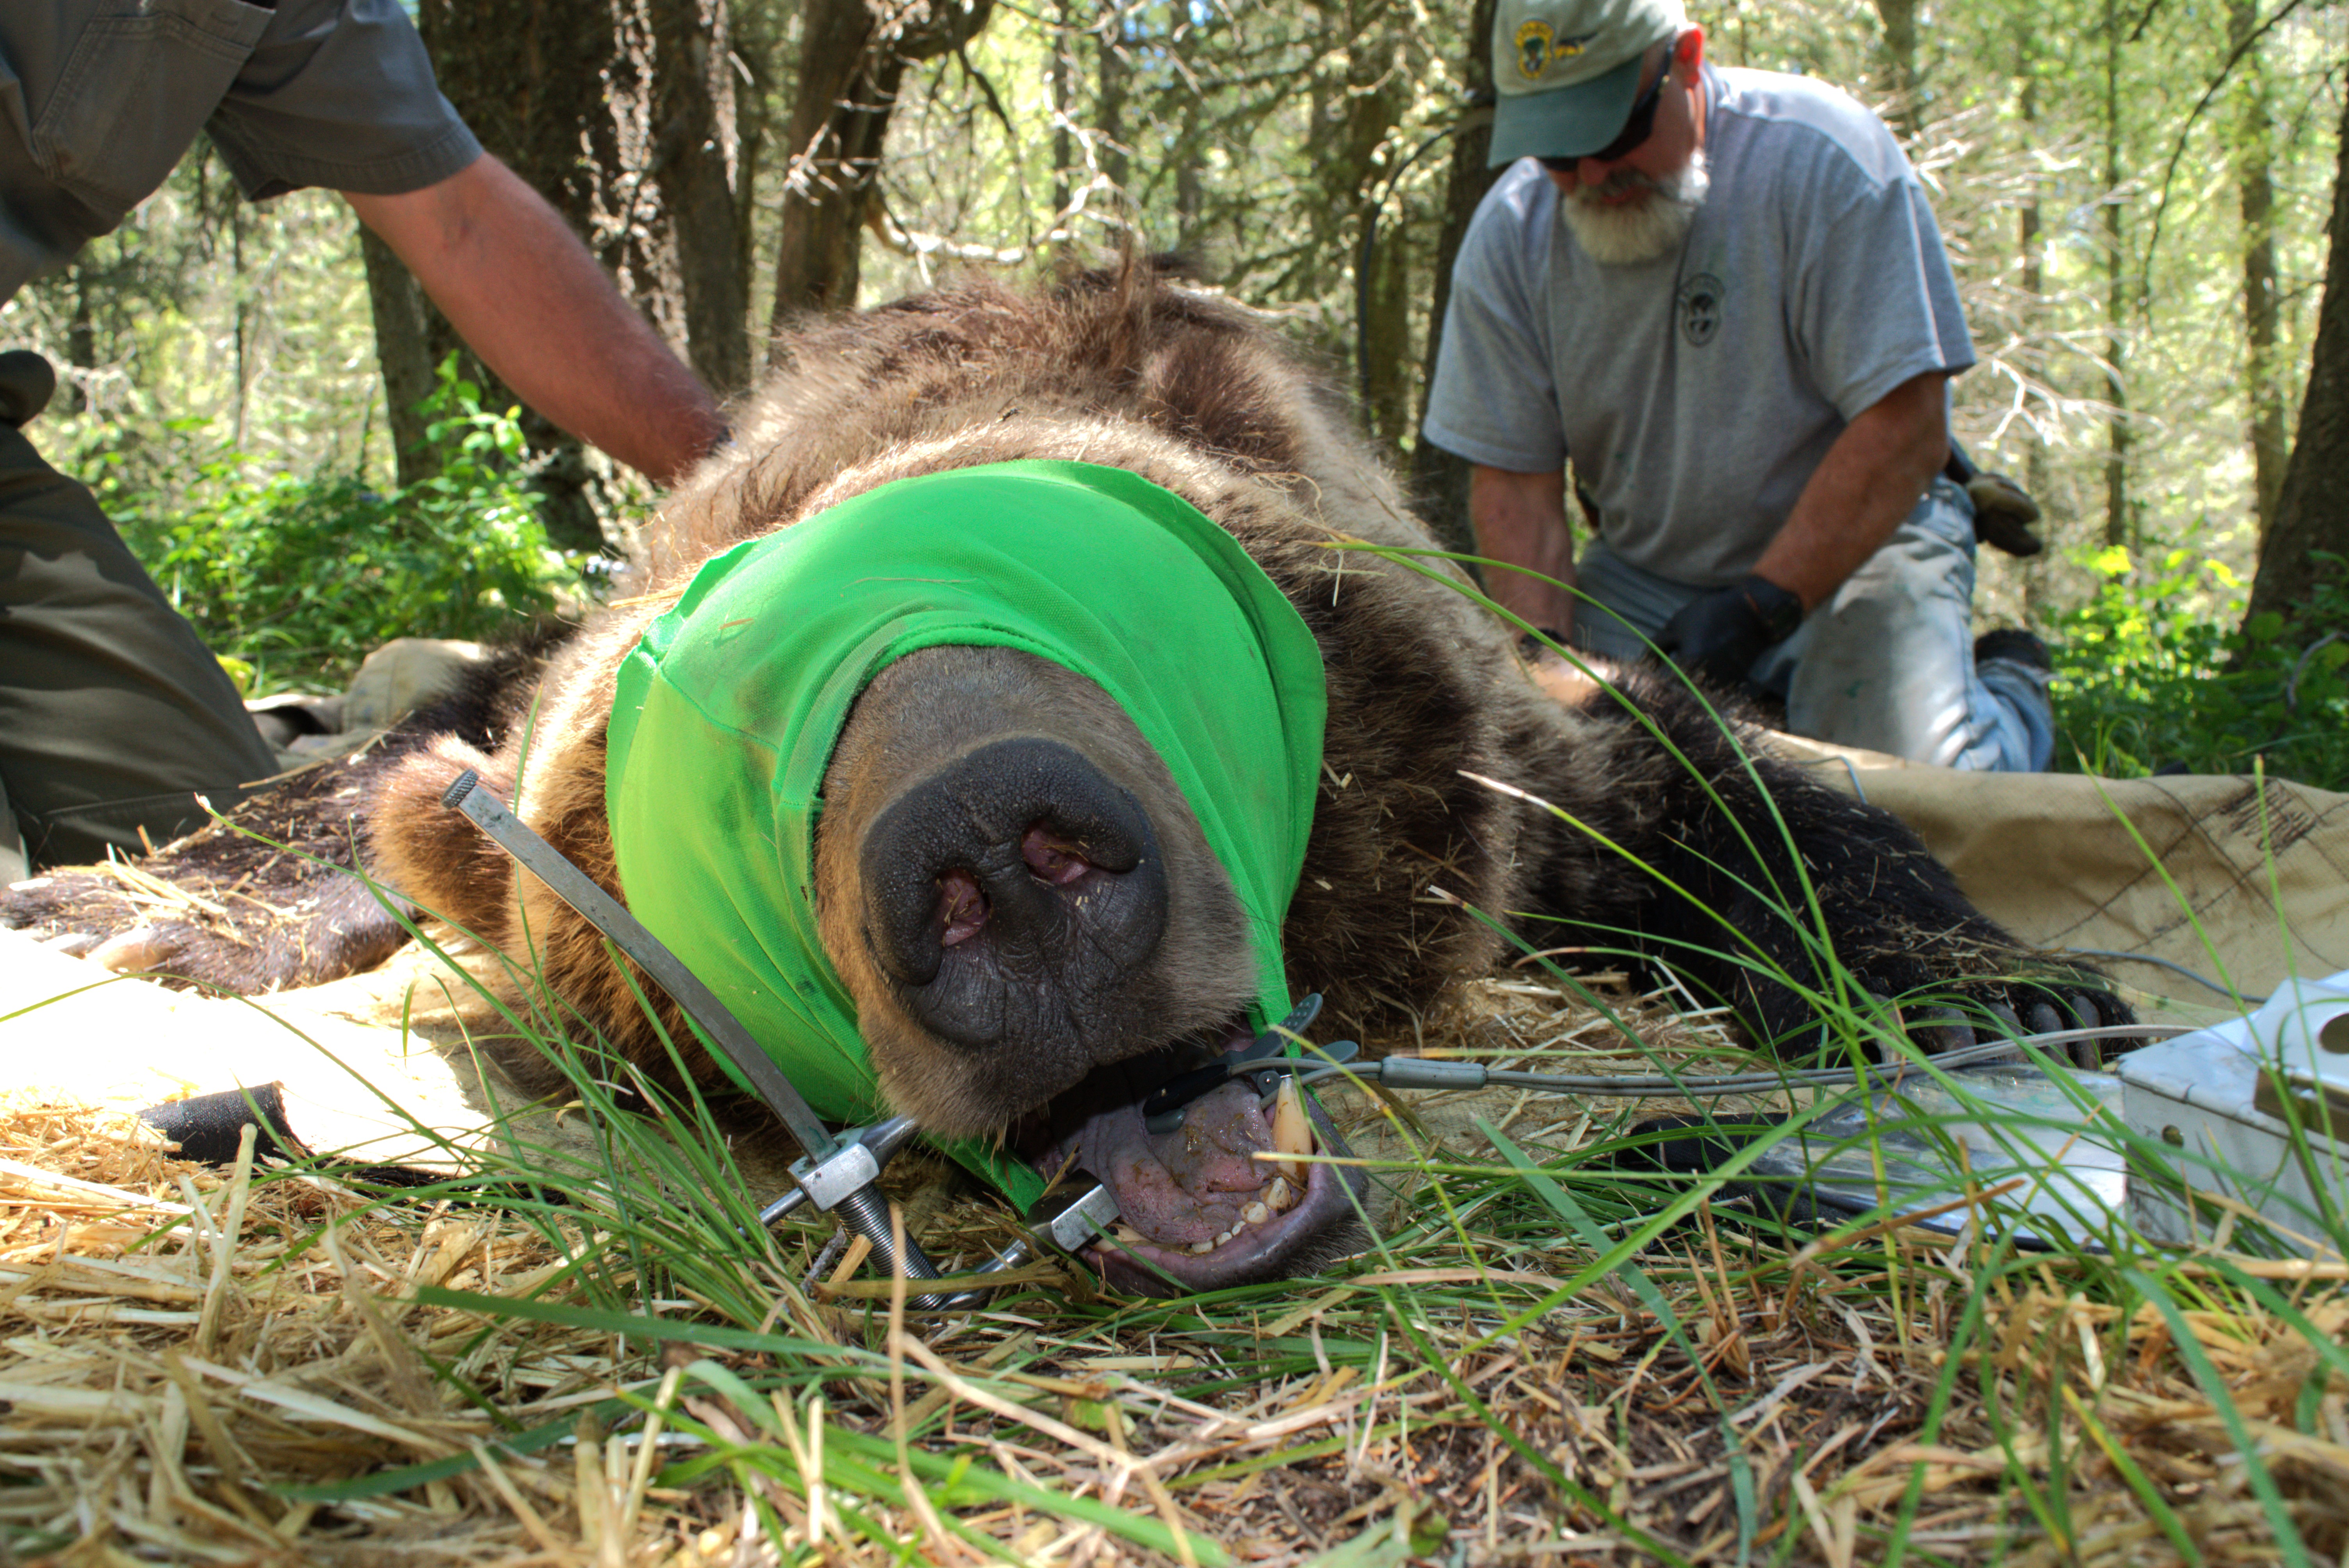 Sedated grizzly bear with its mouth open prior to being fitted with a GPS collar 